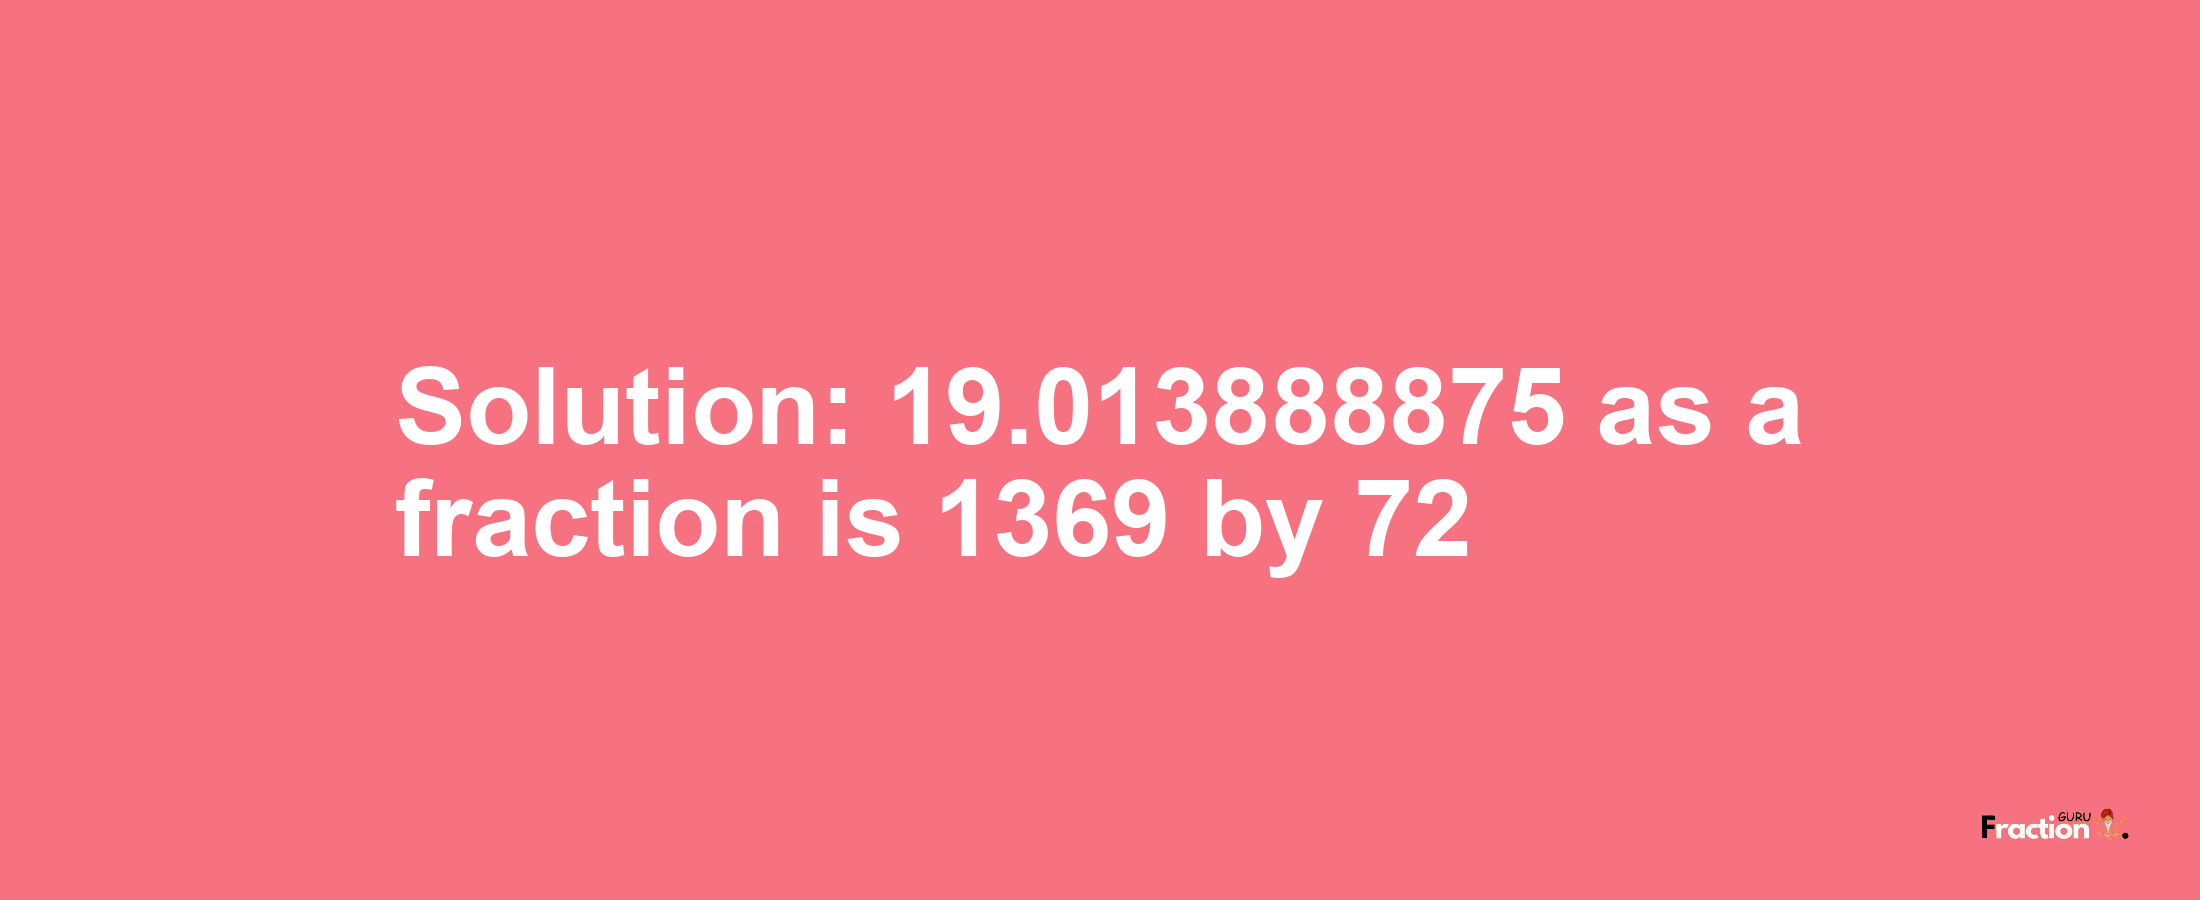 Solution:19.013888875 as a fraction is 1369/72